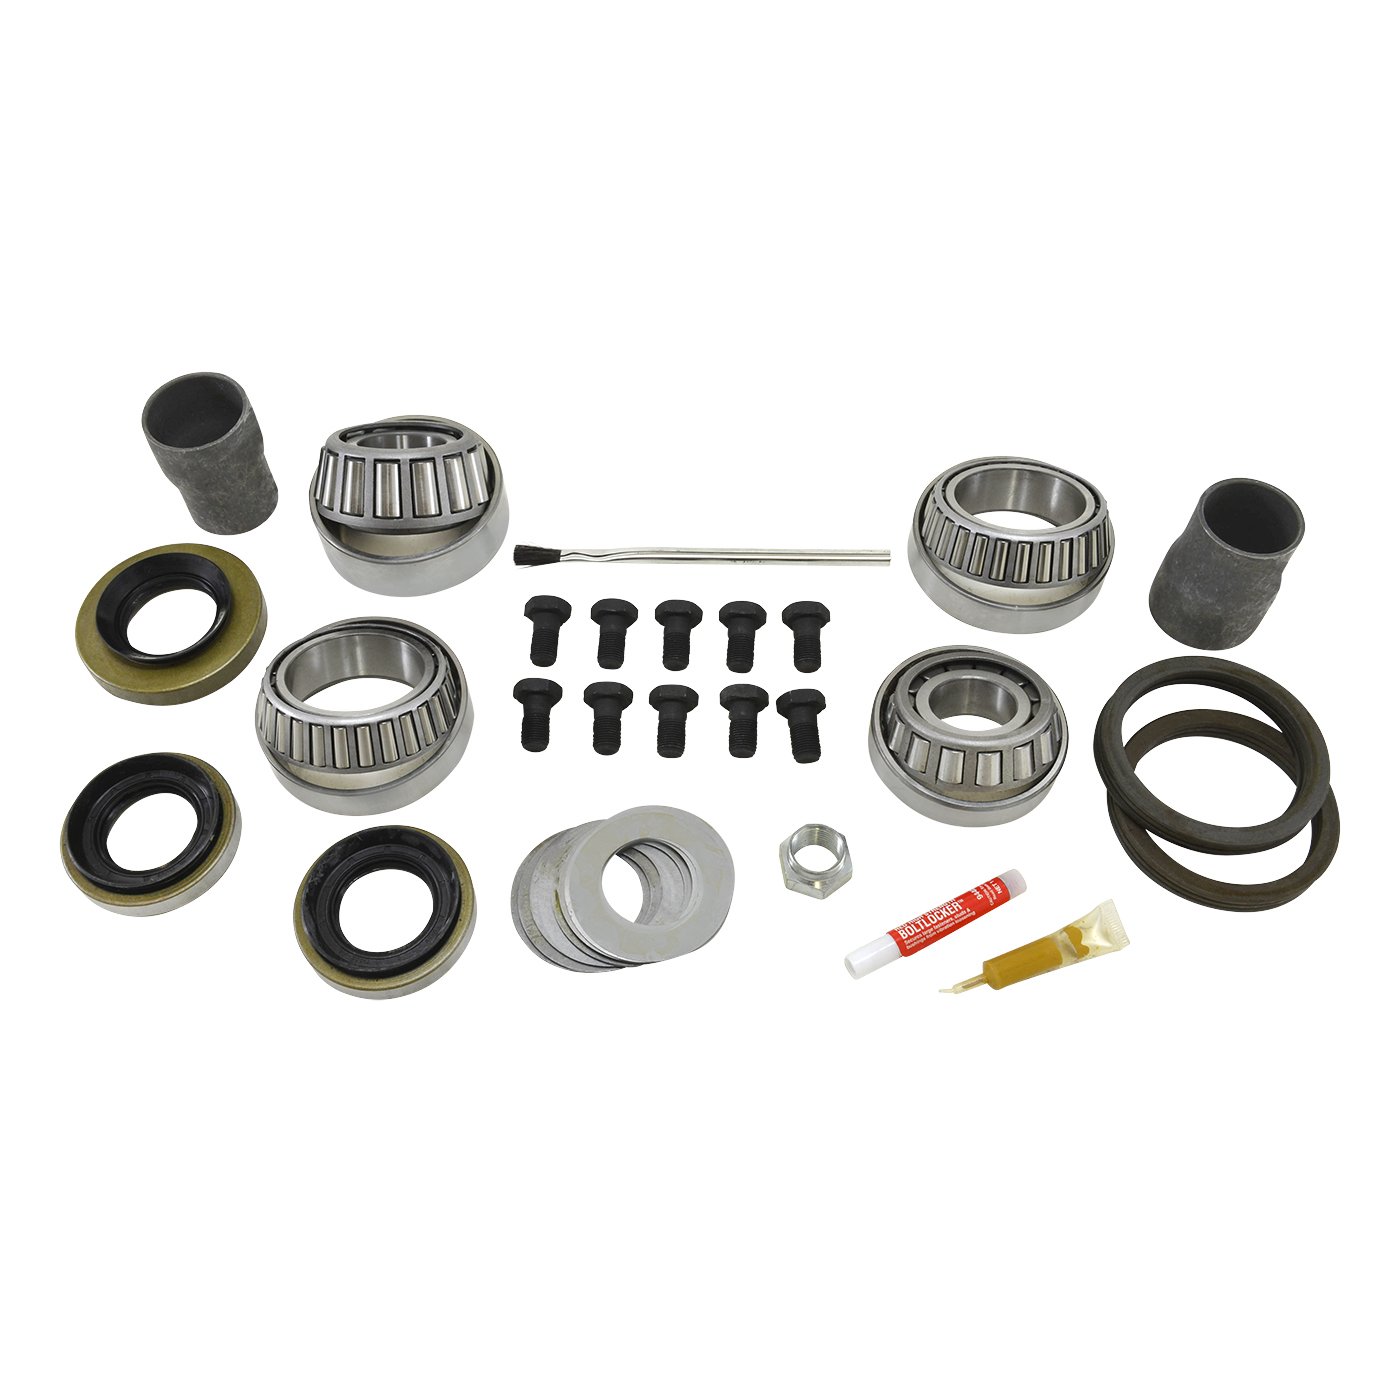 USA Standard 37111 Master Overhaul Kit, For Toyota 7.5 in. Ifs Differential, V6